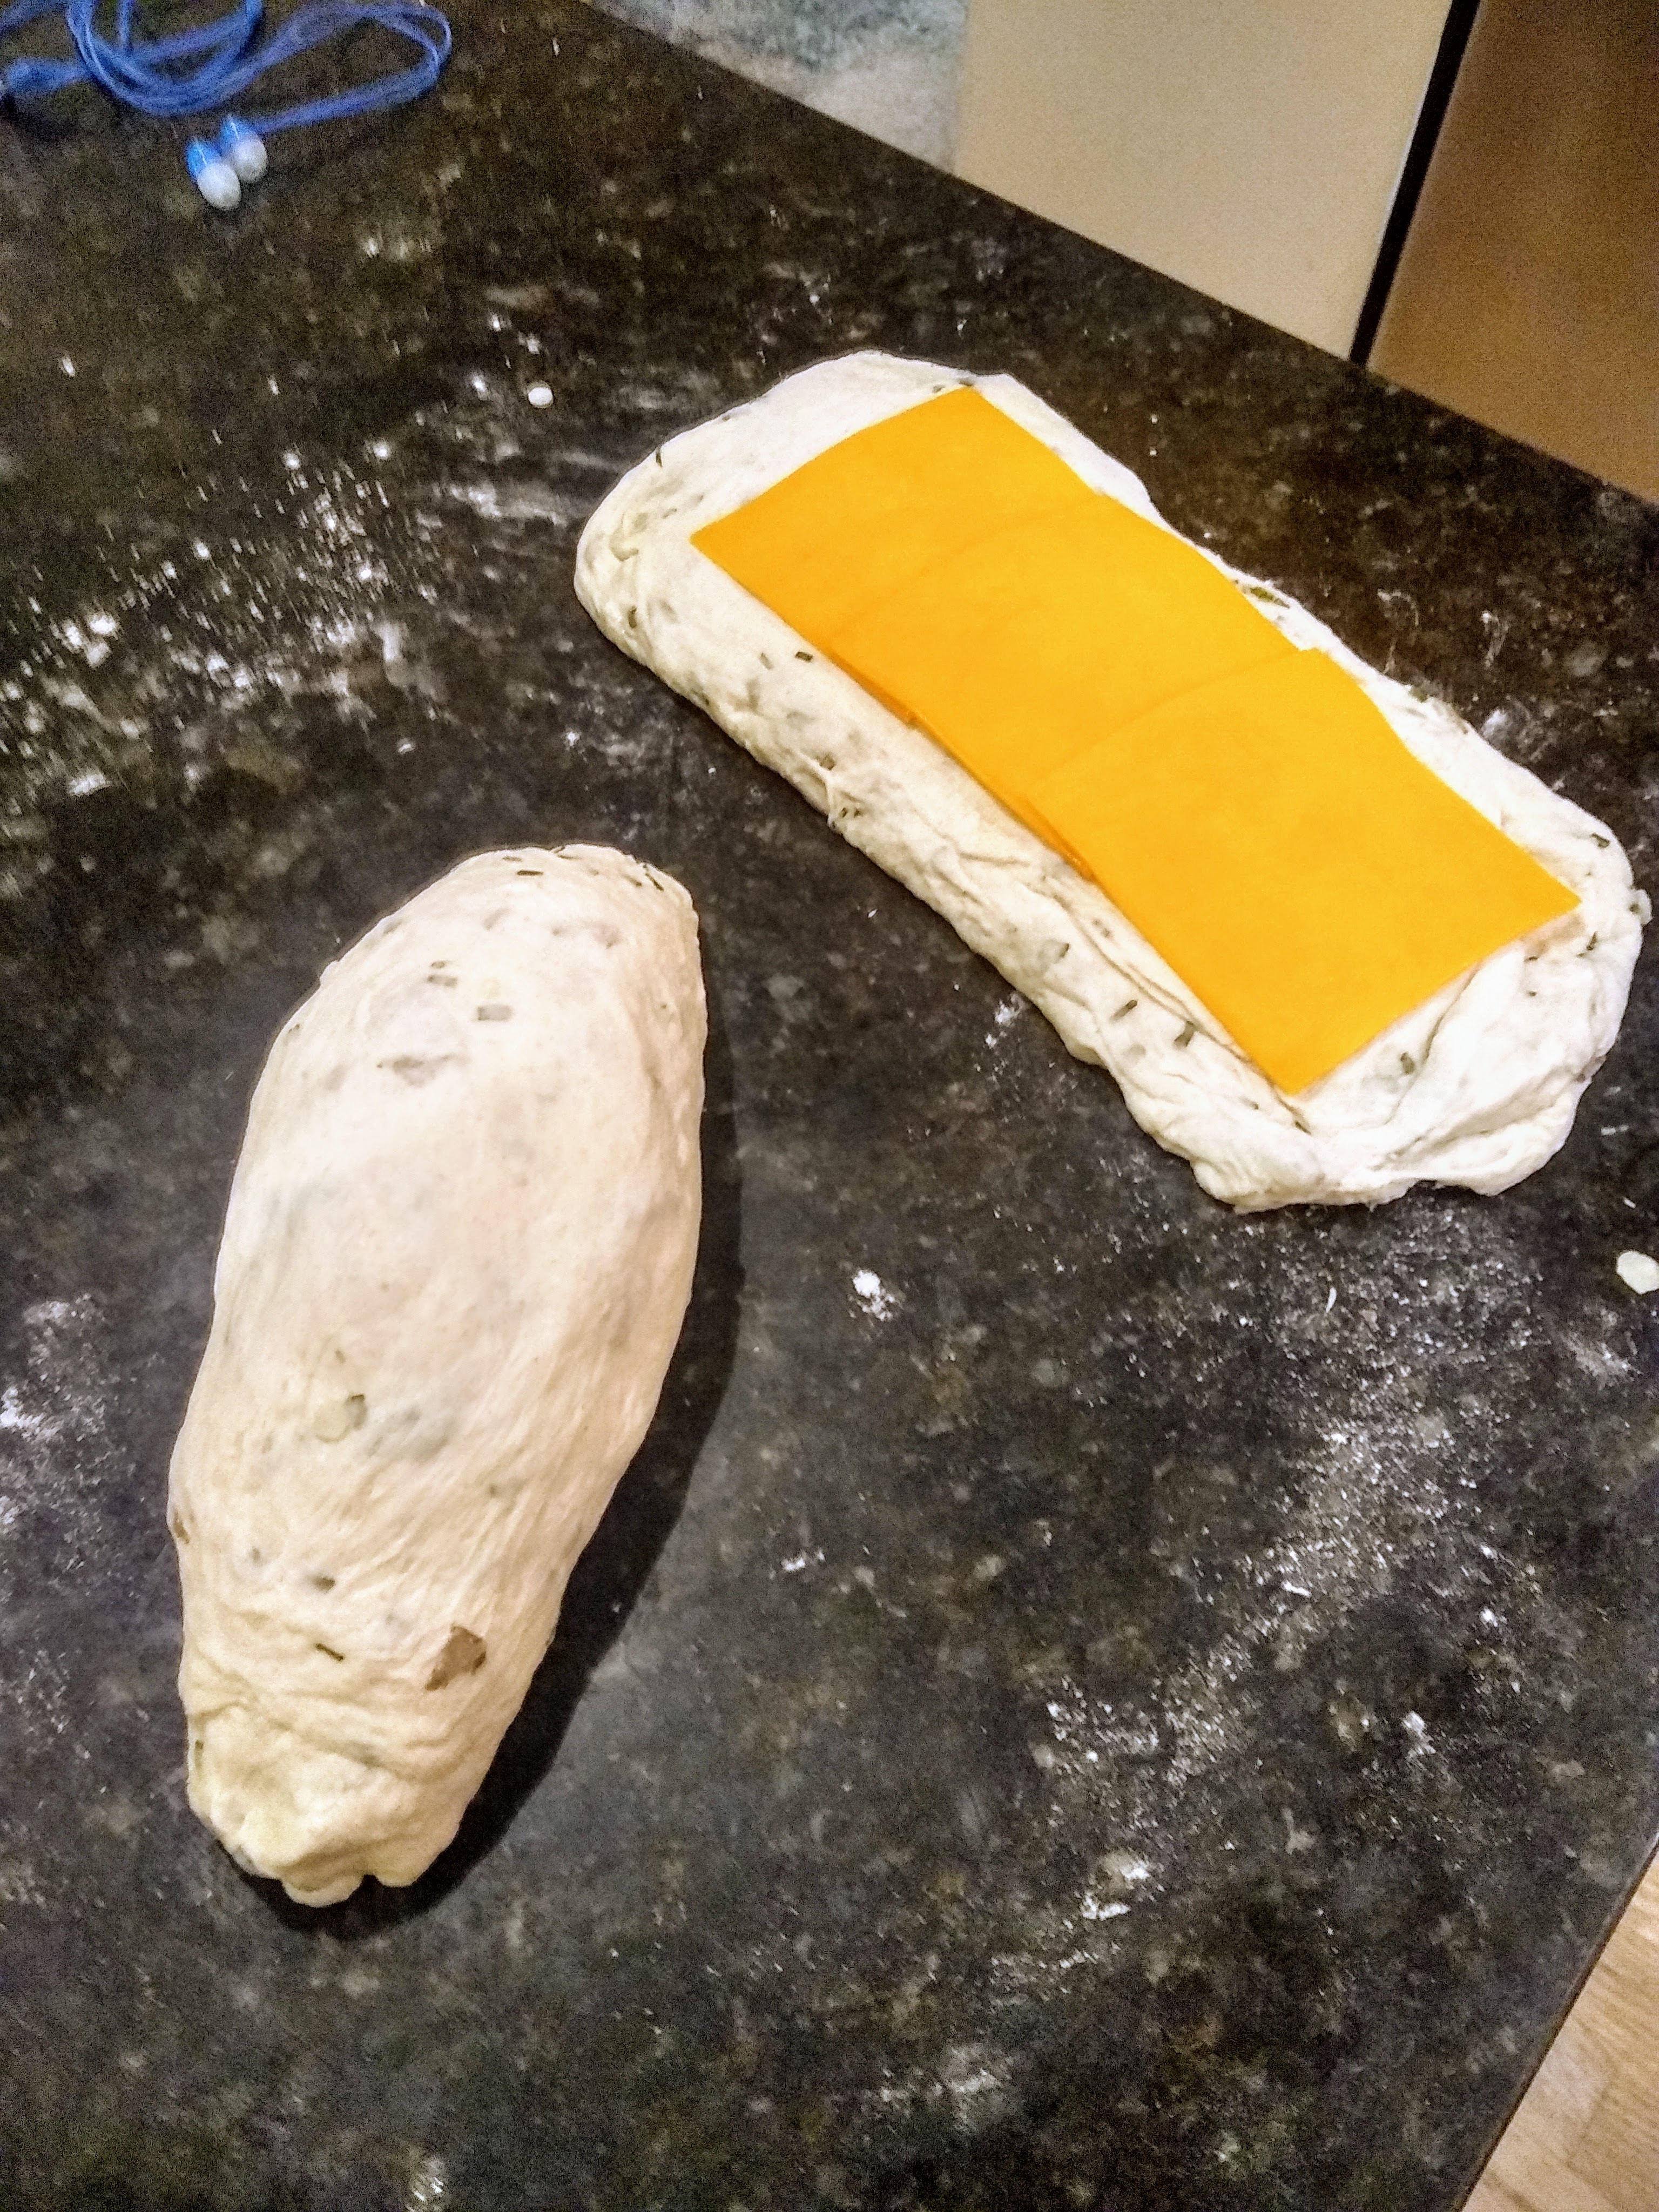 Forming rolls of bread with a spiral of cheese.